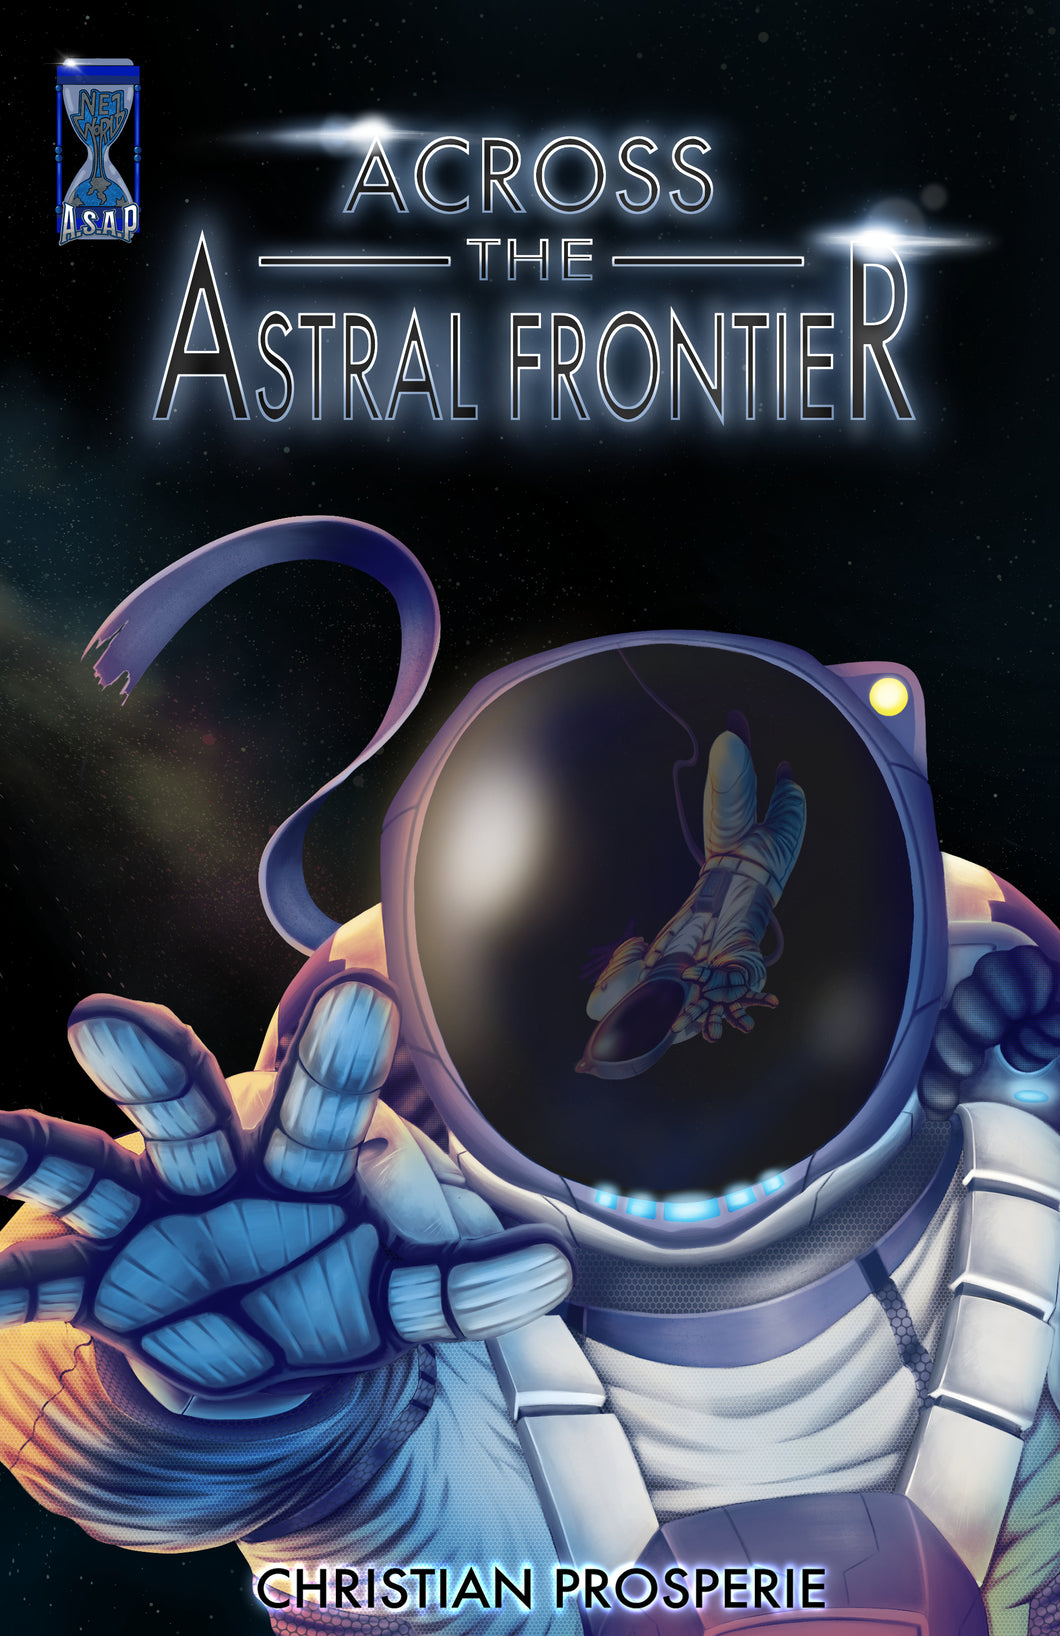 EPUB DOWNLOAD - Across the Astral Frontier